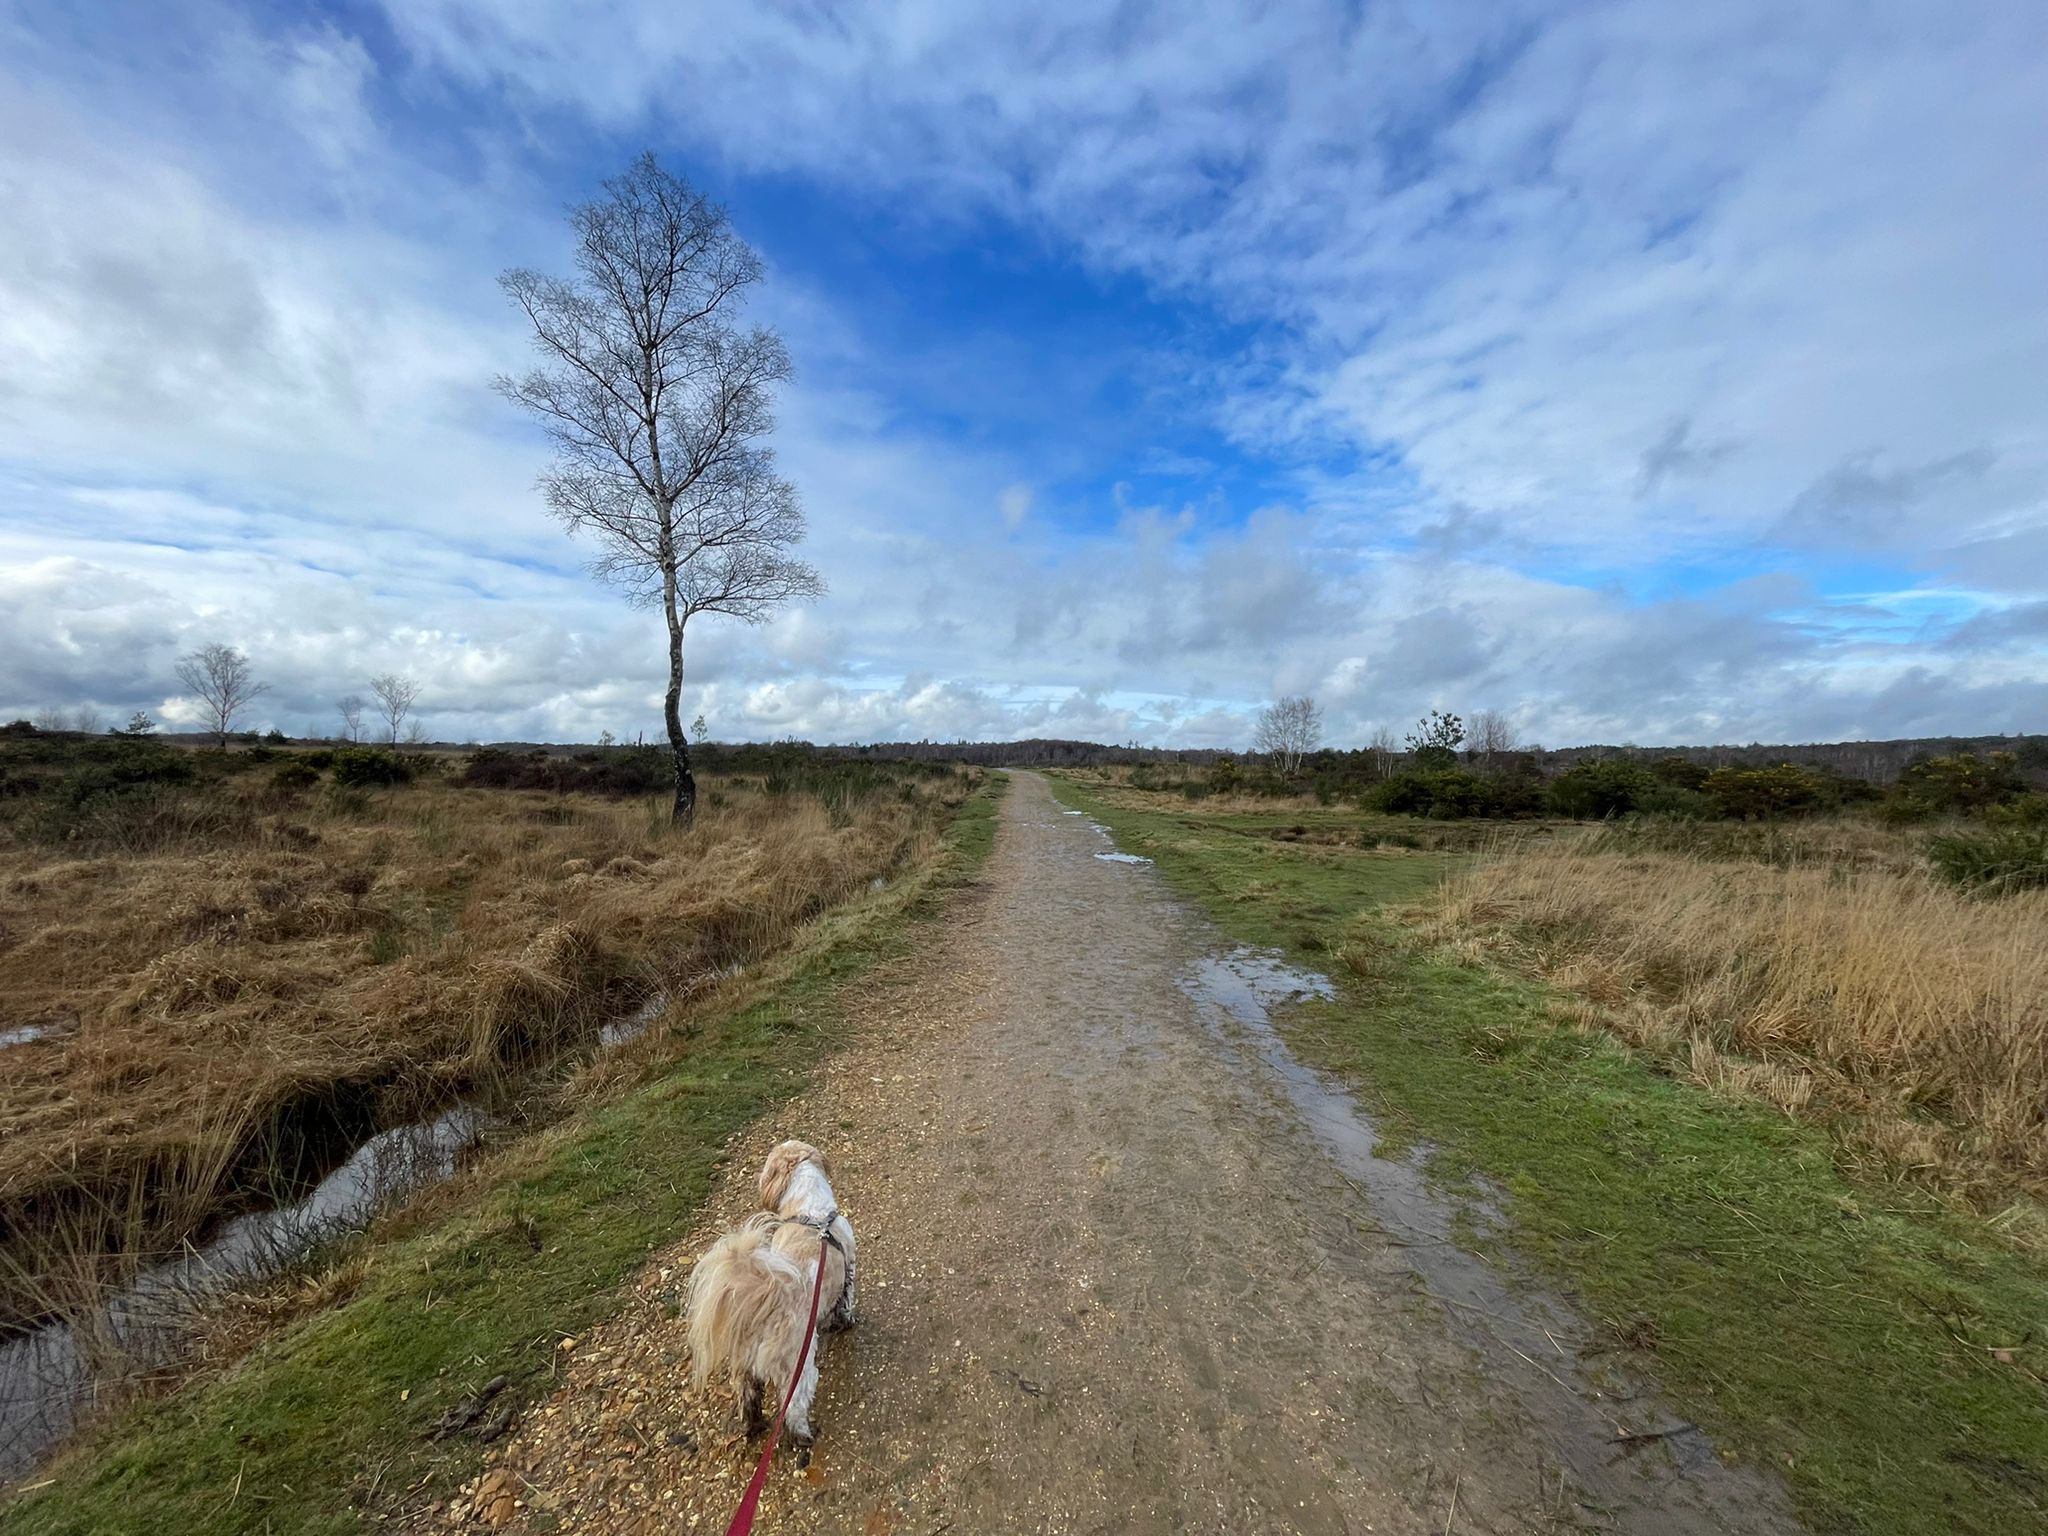 A small beige and white dog walking down a wide heathland path. There are lots of puddles and a ditch full of water running alongside. Blue sky and clouds in the background.